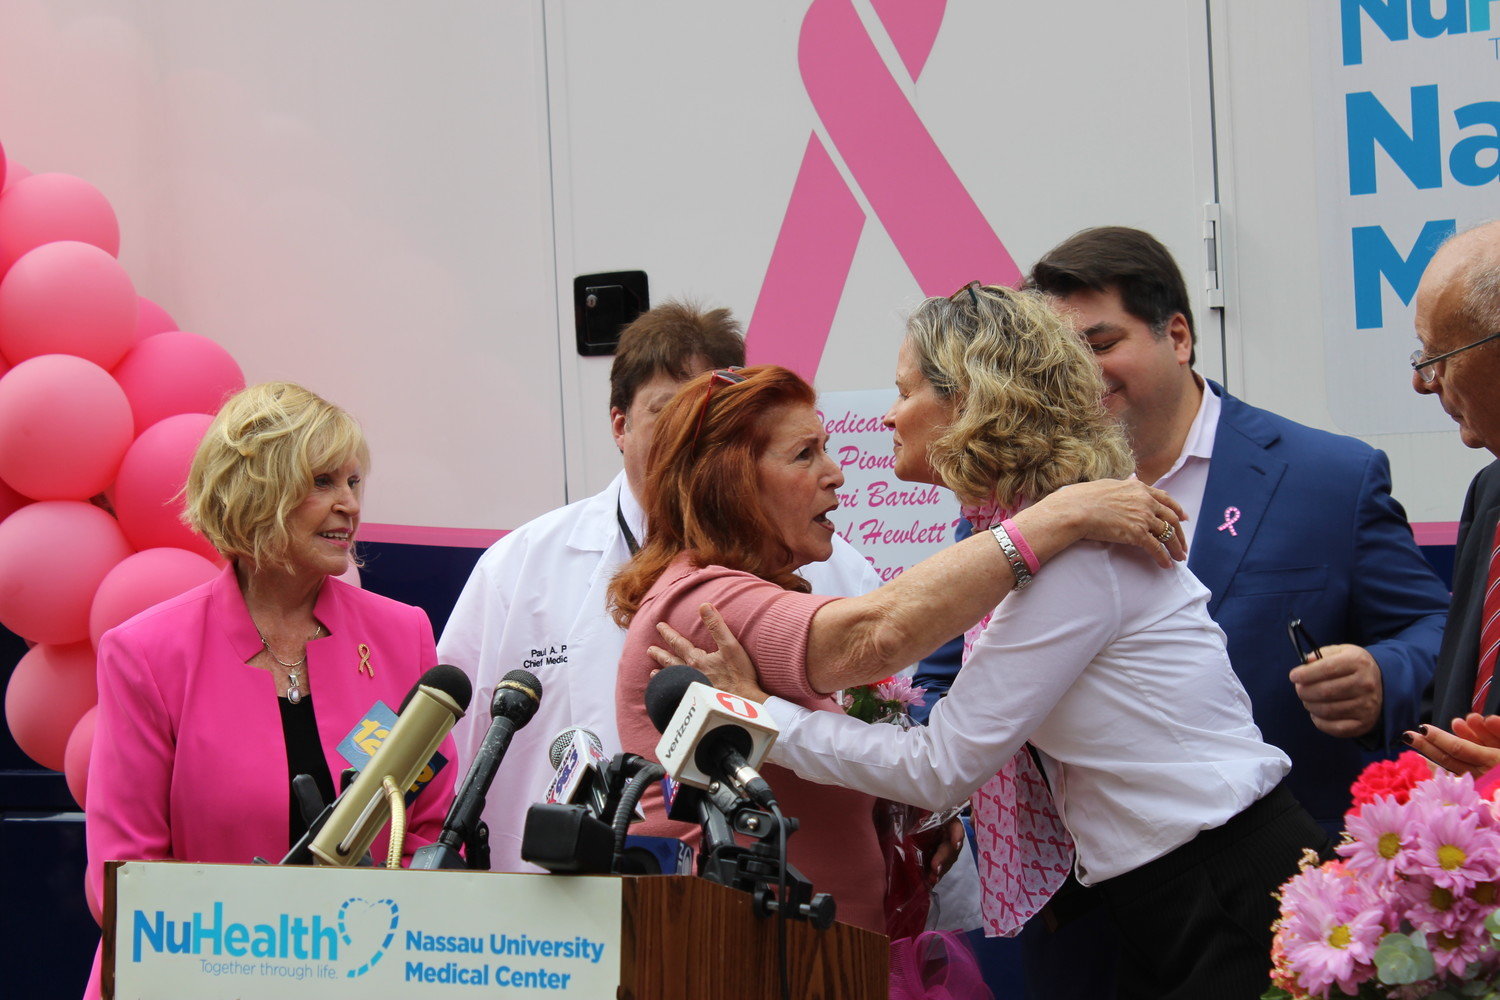 Hewlett House Executive Director Geri Barish, center, was honored by Nassau County Executive Laura Curran last year for raising breast cancer awareness on Long Island.